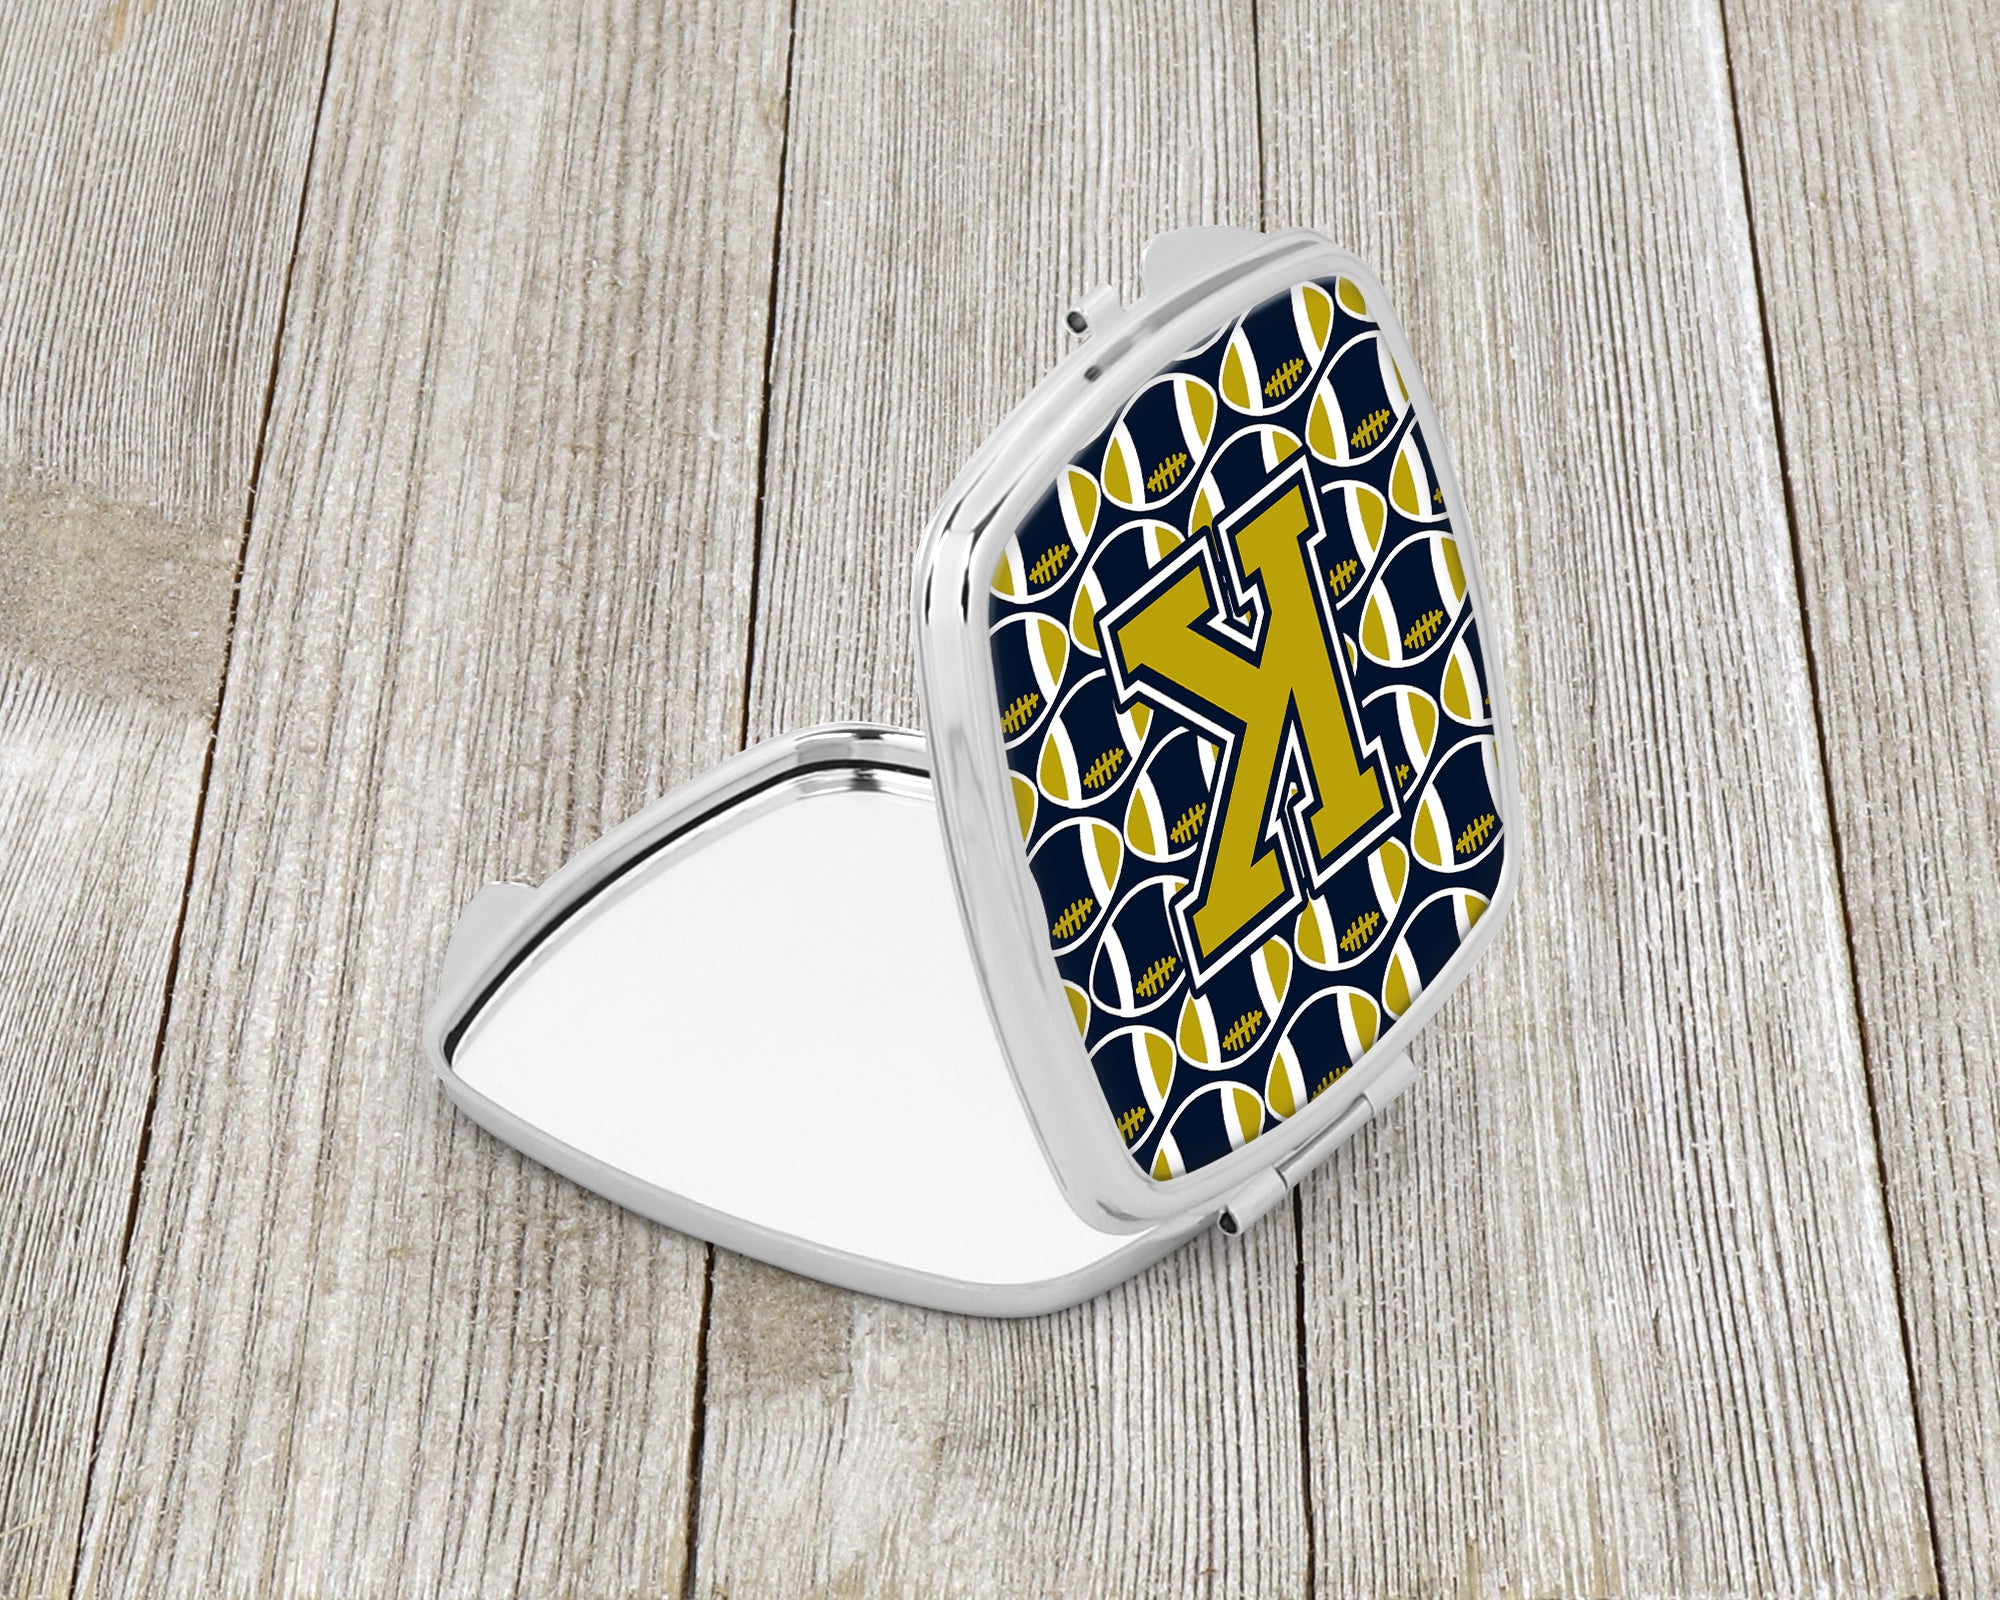 Letter K Football Blue and Gold Compact Mirror CJ1074-KSCM  the-store.com.